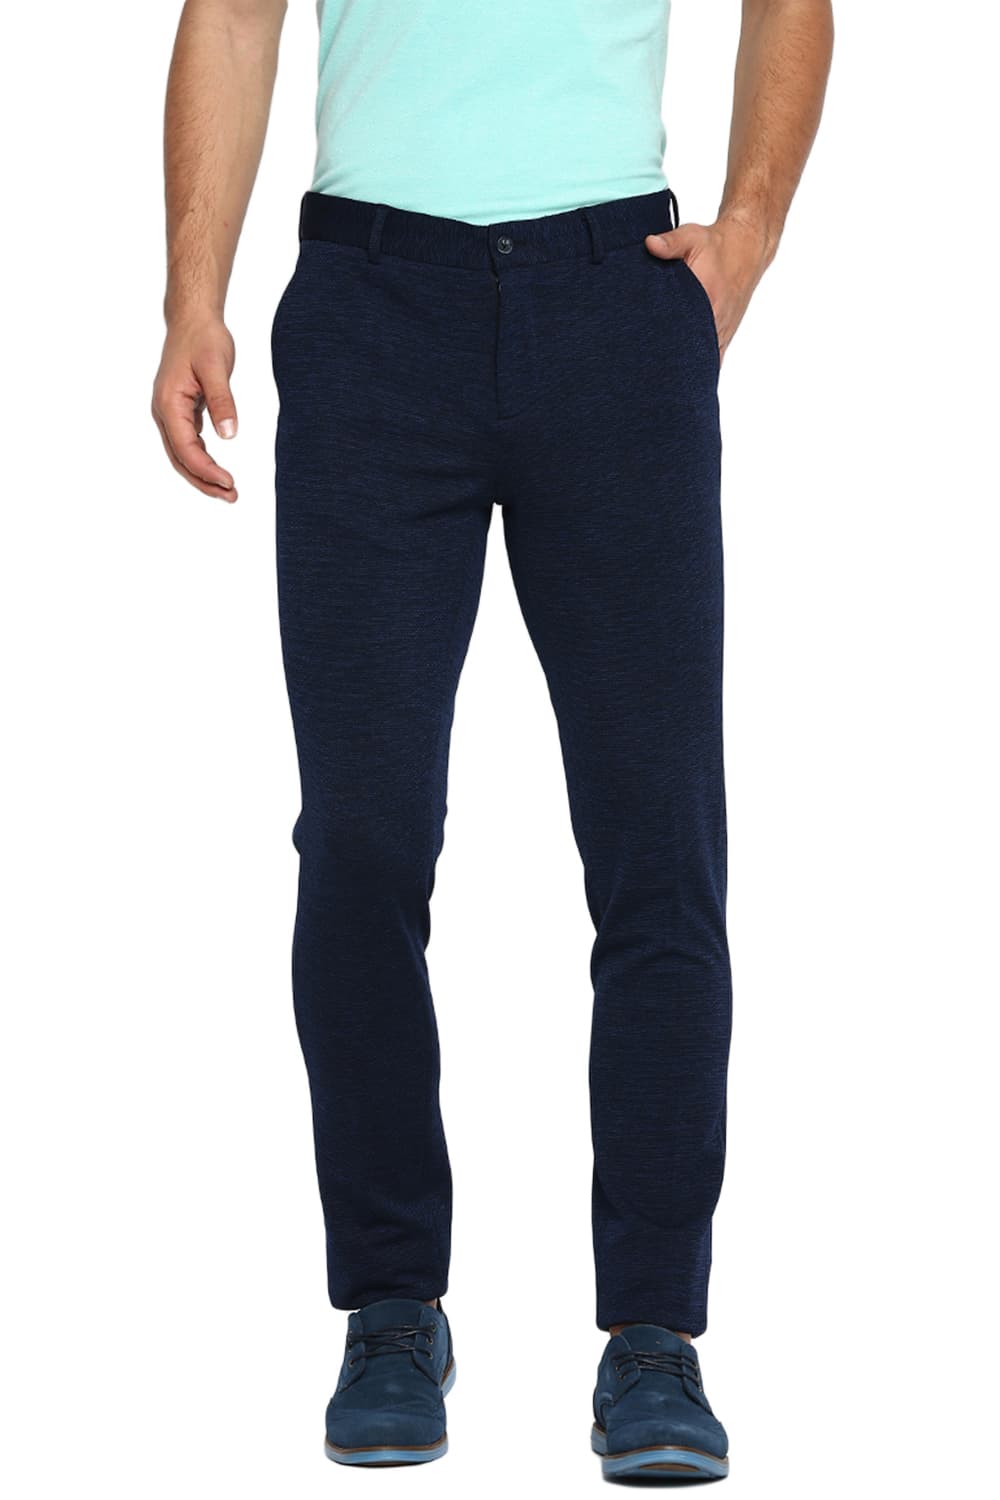 BASICS TAPERED FIT KNITTED TROUSER